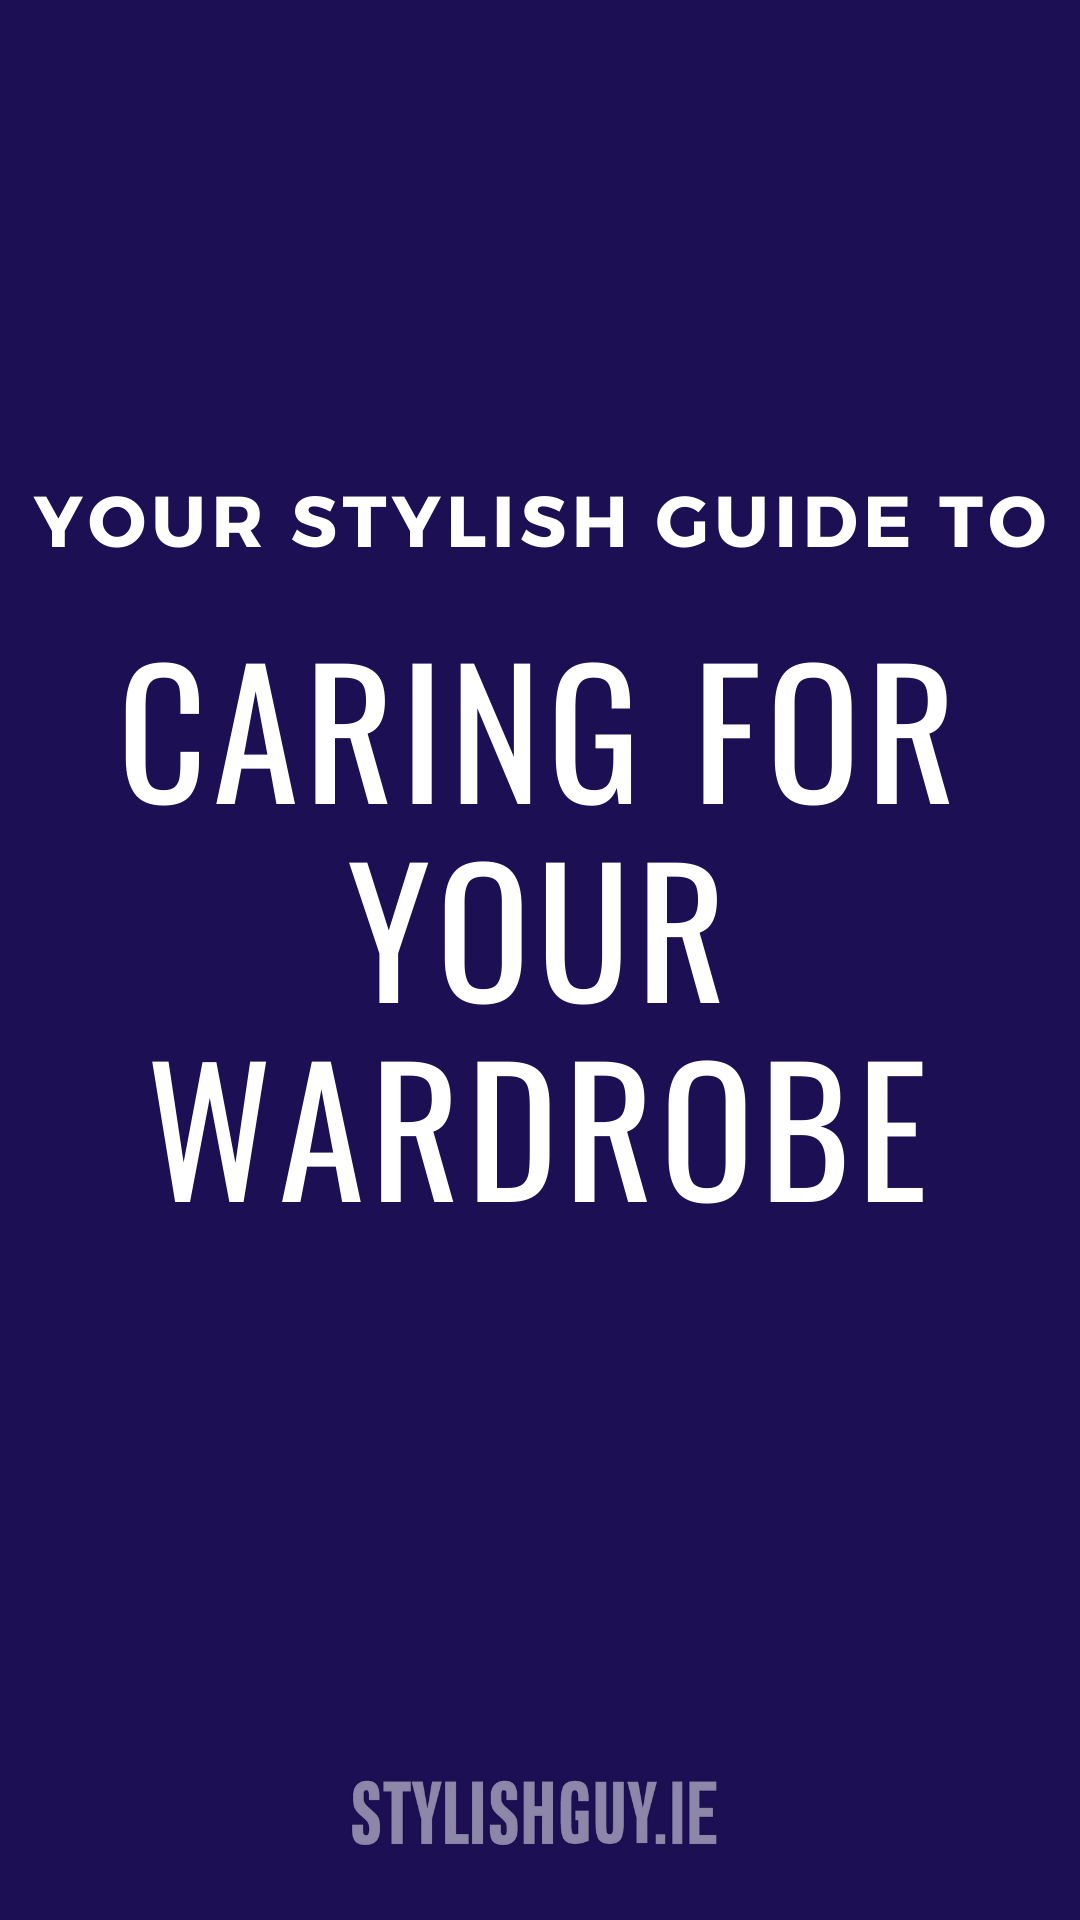 The Stylish Guide: 7 Ways to Care for Your Wardrobe